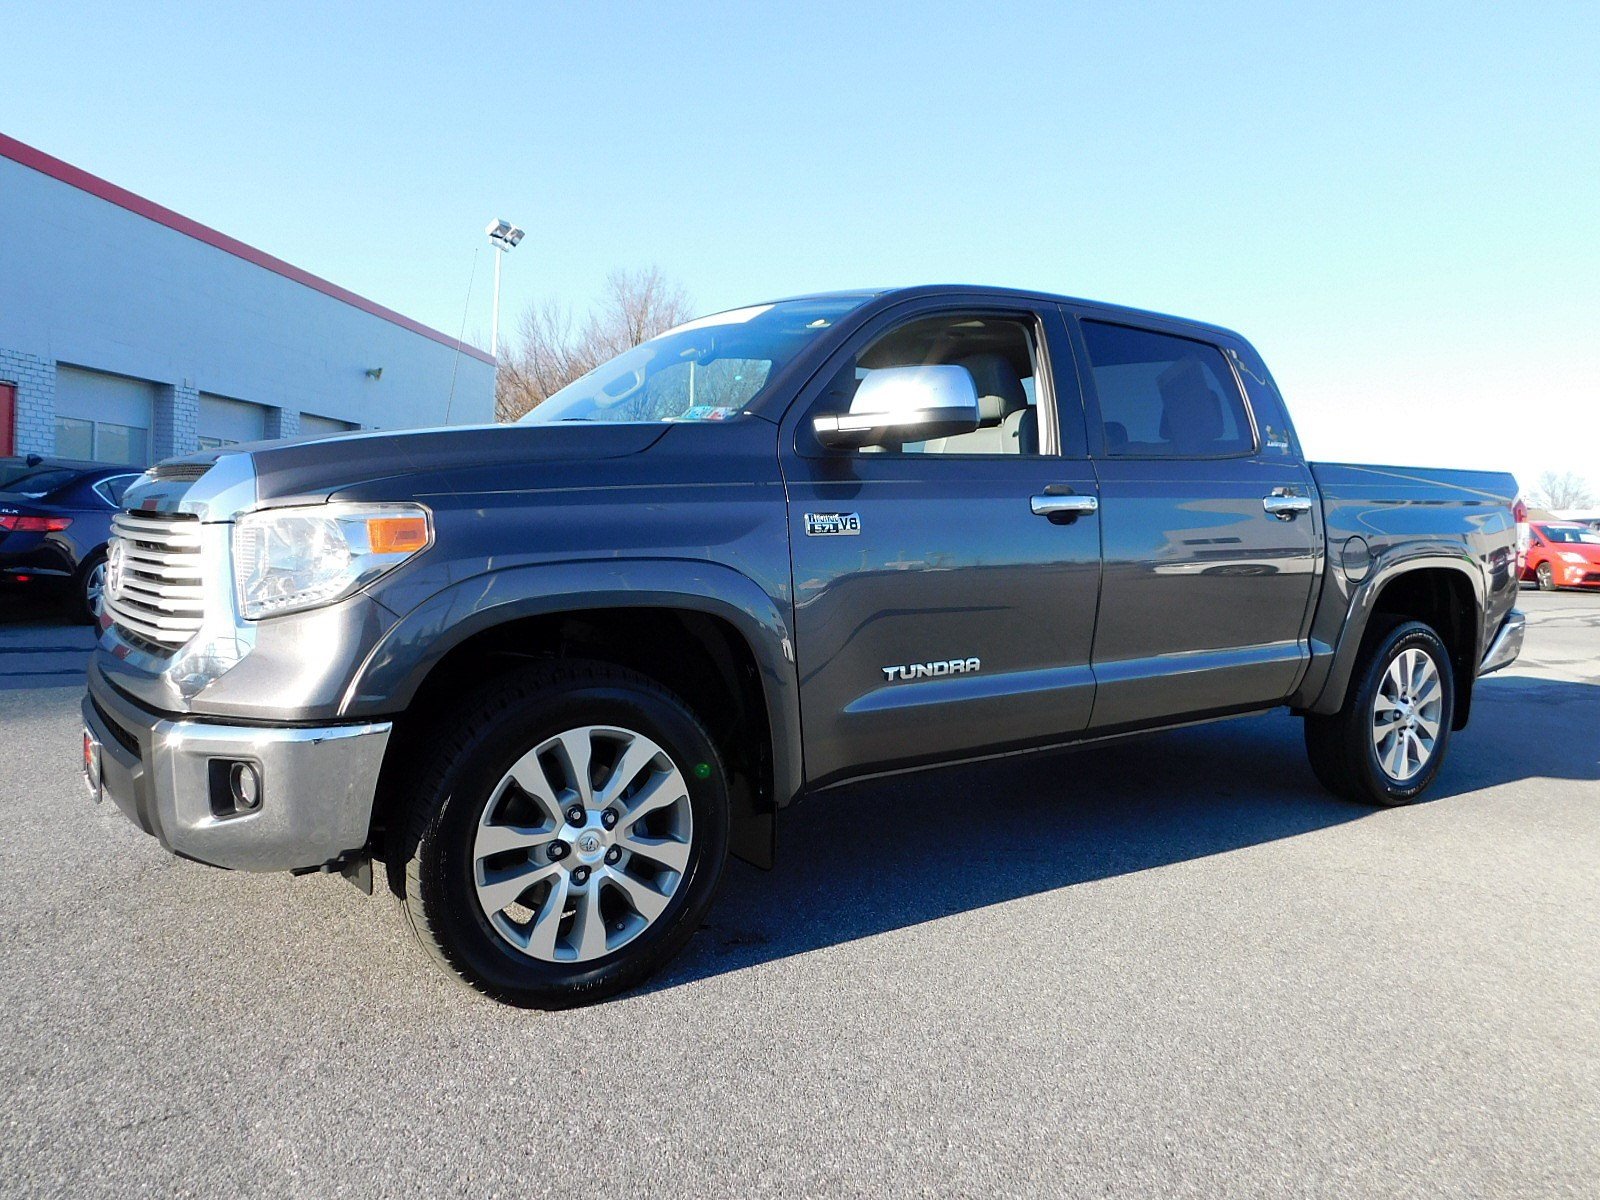 Certified Pre-Owned 2015 Toyota Tundra LTD Crew Cab Pickup in East